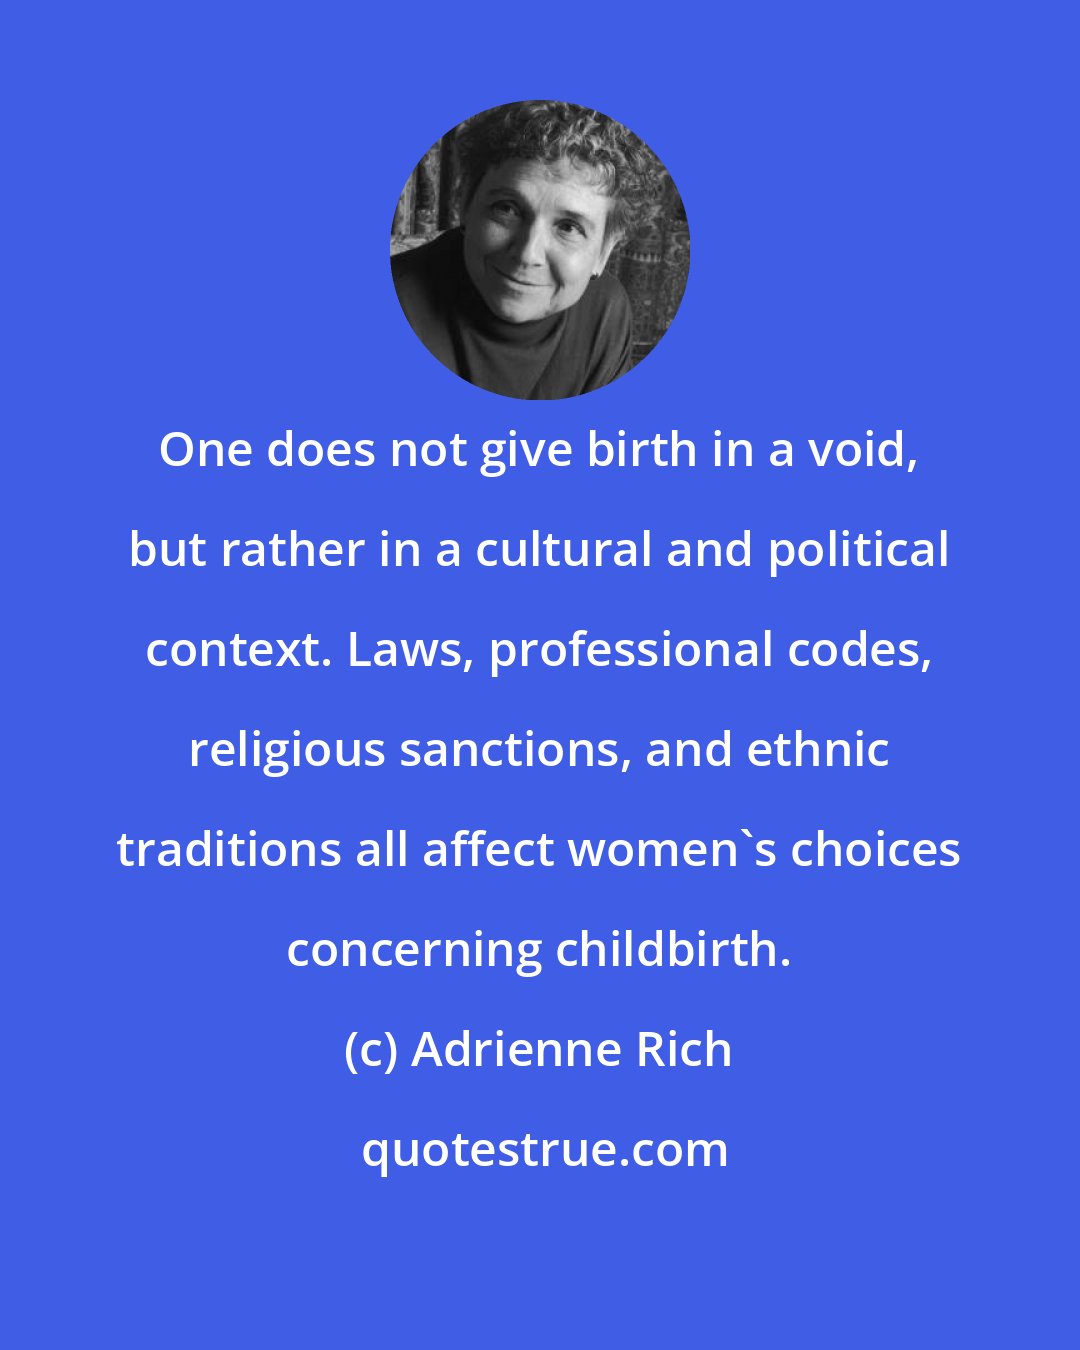 Adrienne Rich: One does not give birth in a void, but rather in a cultural and political context. Laws, professional codes, religious sanctions, and ethnic traditions all affect women's choices concerning childbirth.